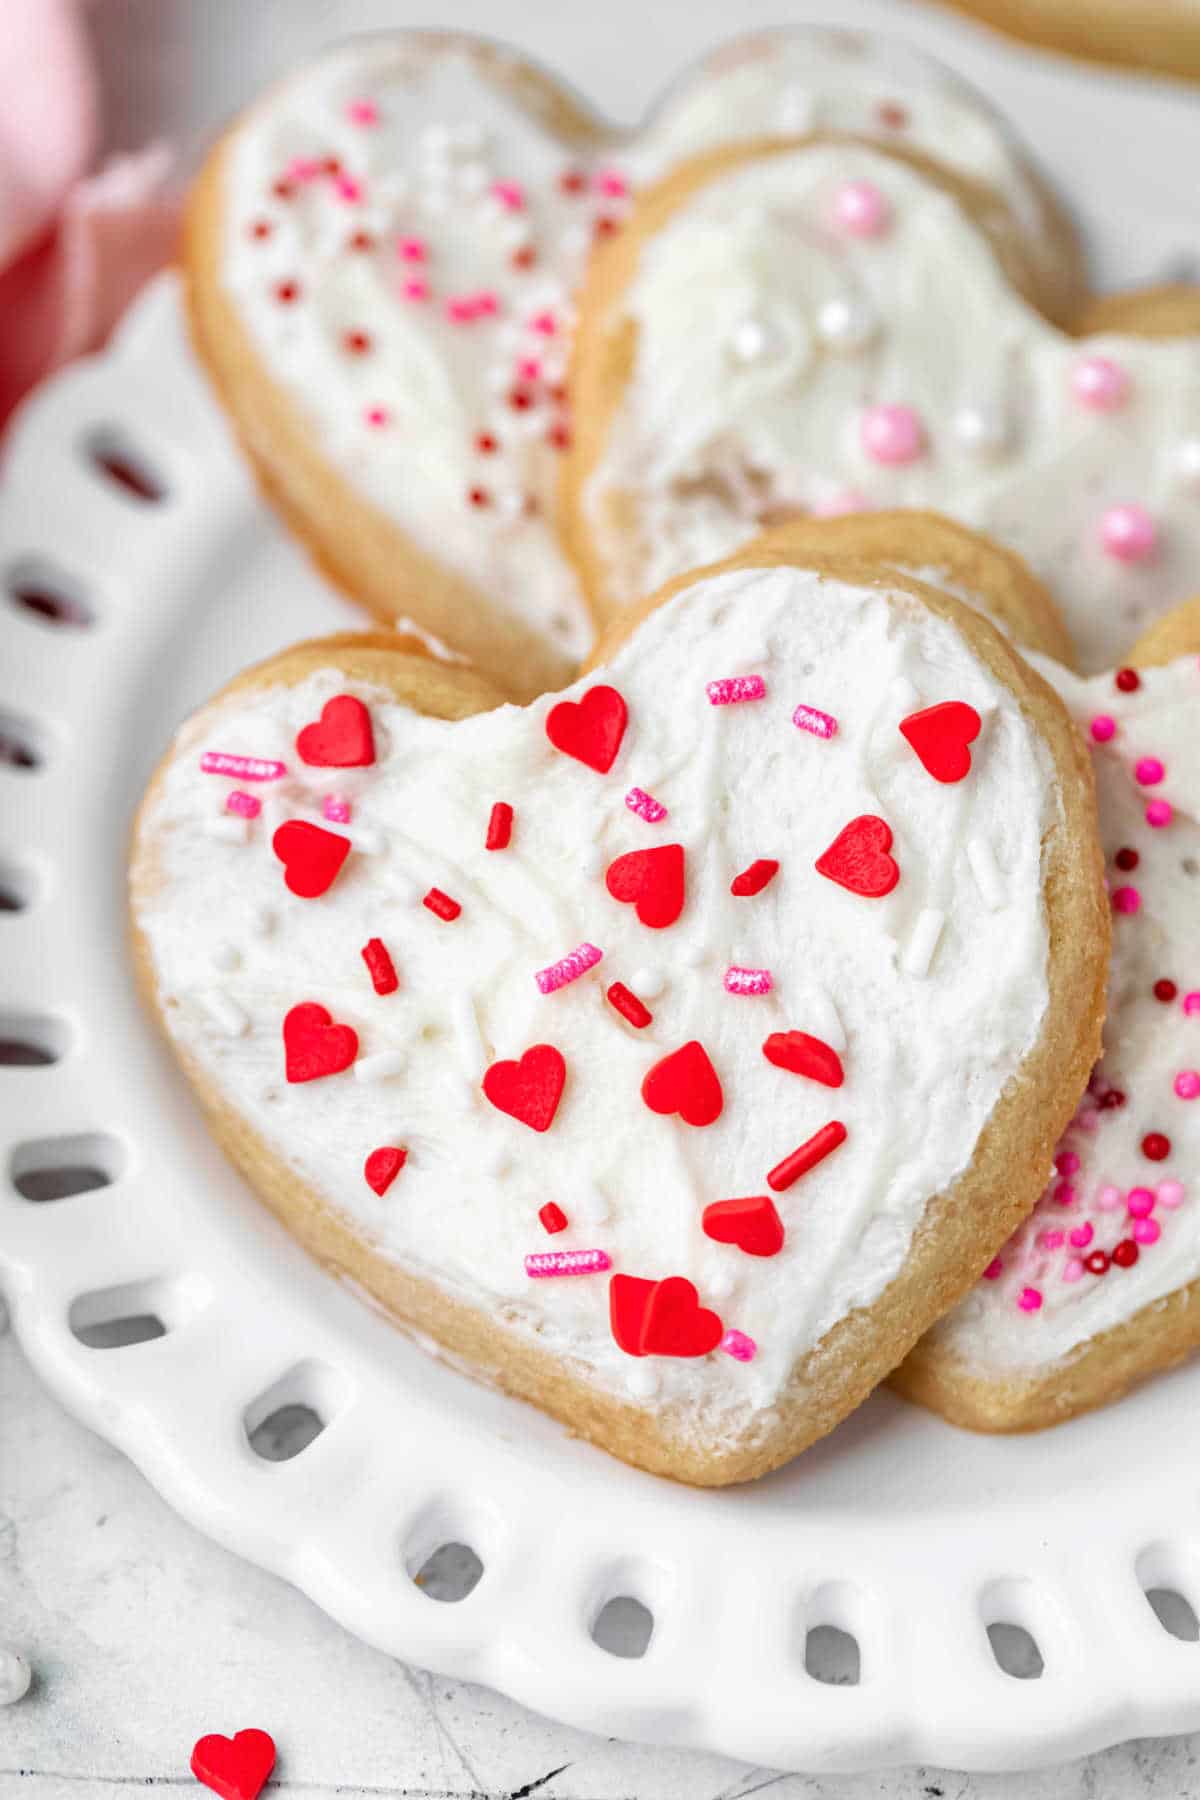 https://www.ihearteating.com/wp-content/uploads/2022/02/Valentines-Day-Cookies-16-1200.jpg